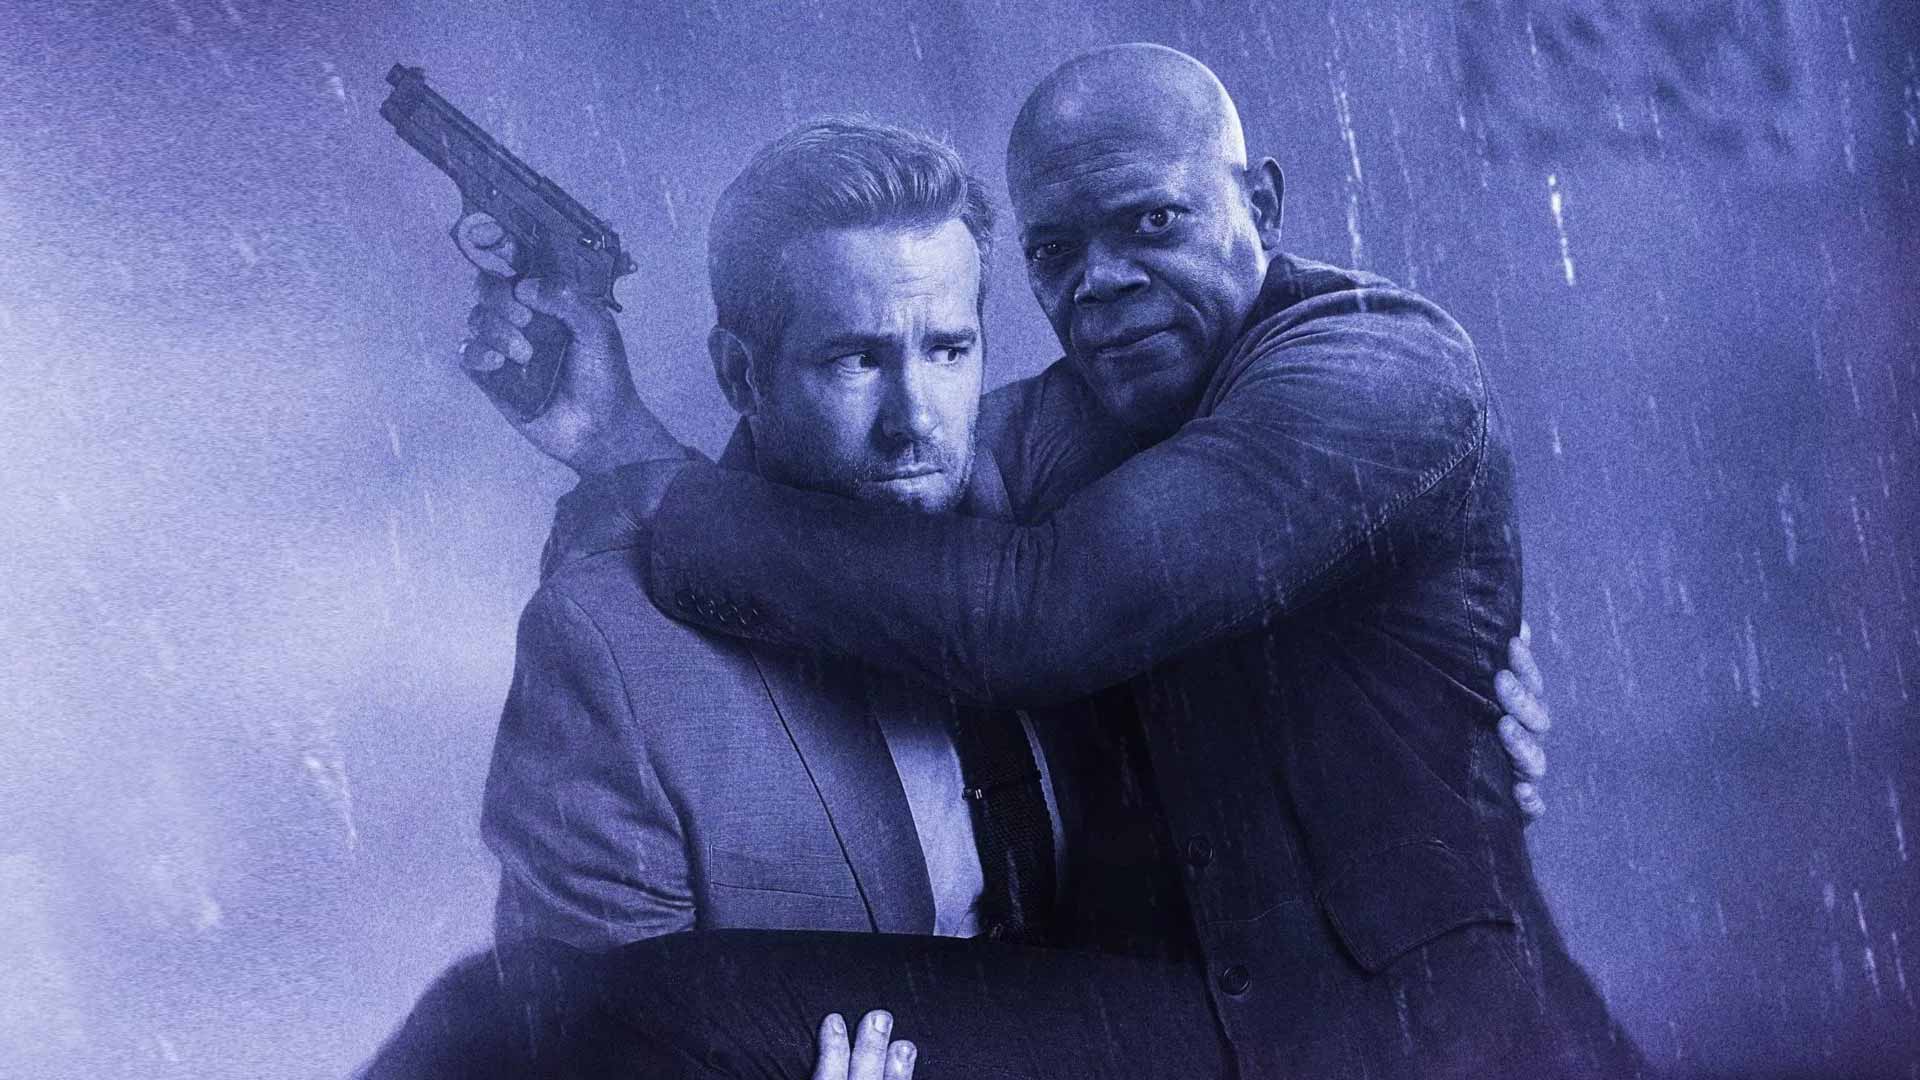 the golden take review the hitman's bodyguard